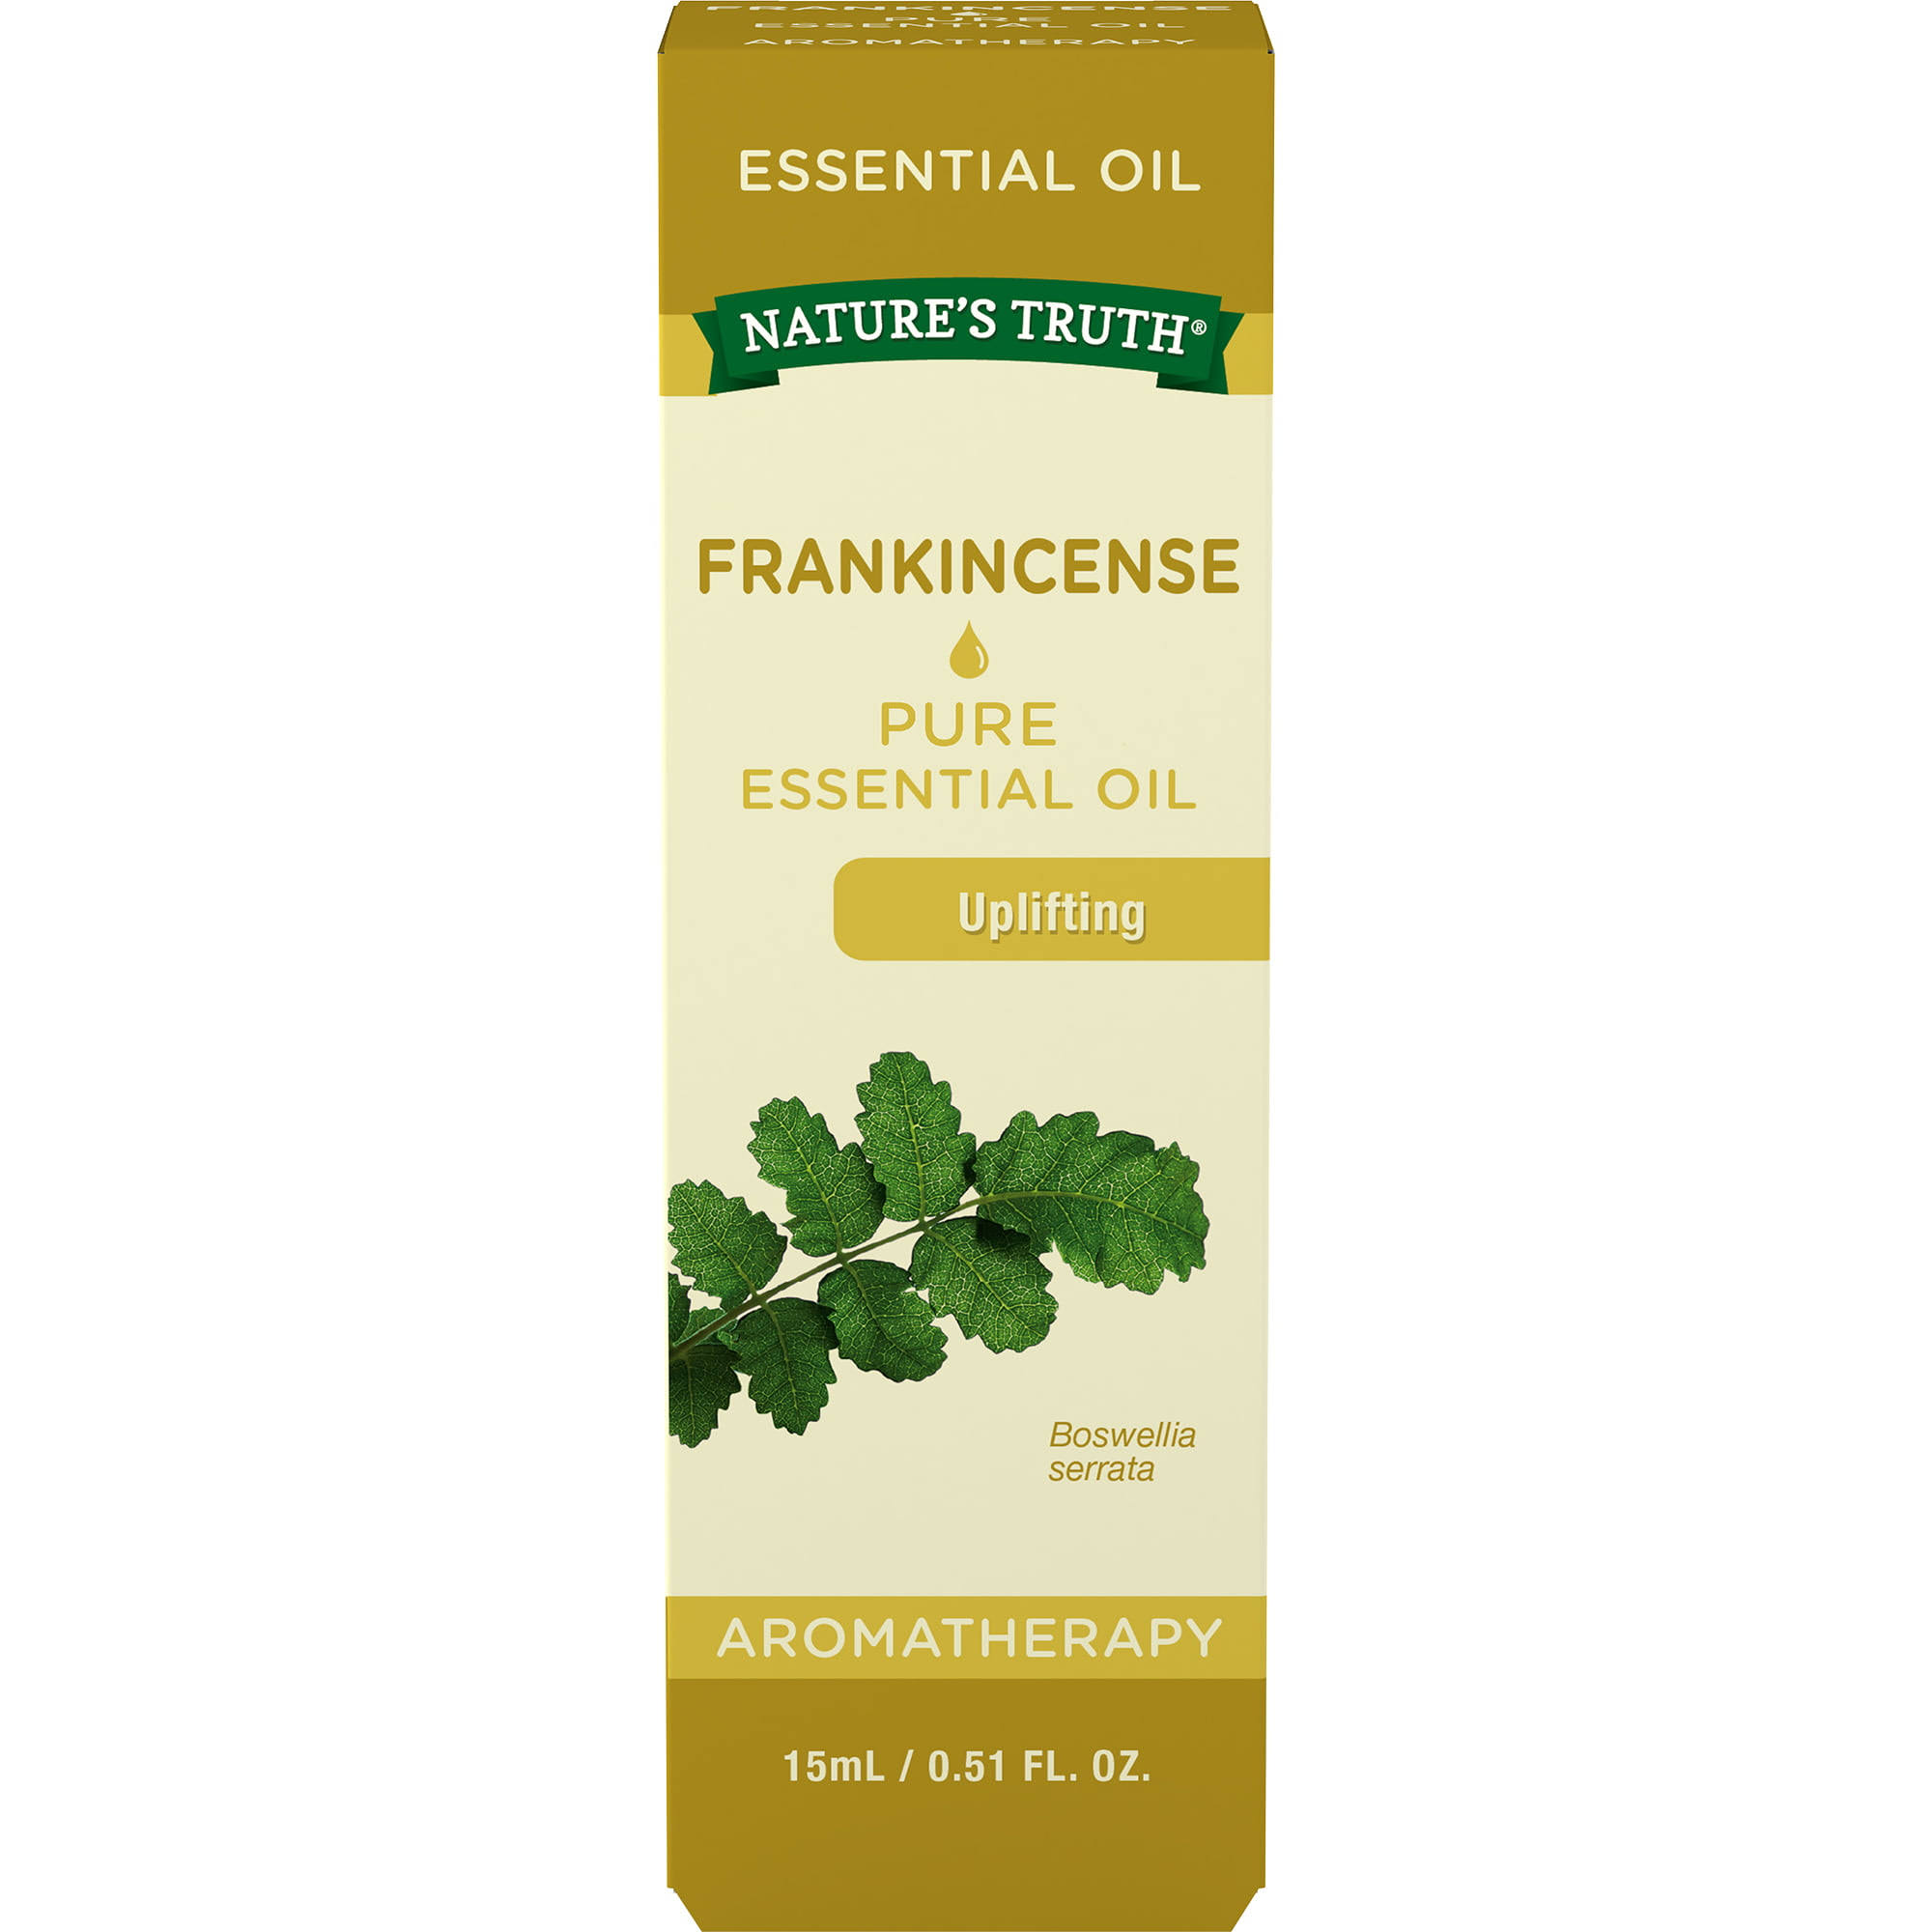 Natures Truth Aromatherapy Pure Essential Oil - Frankincense, 0.51oz